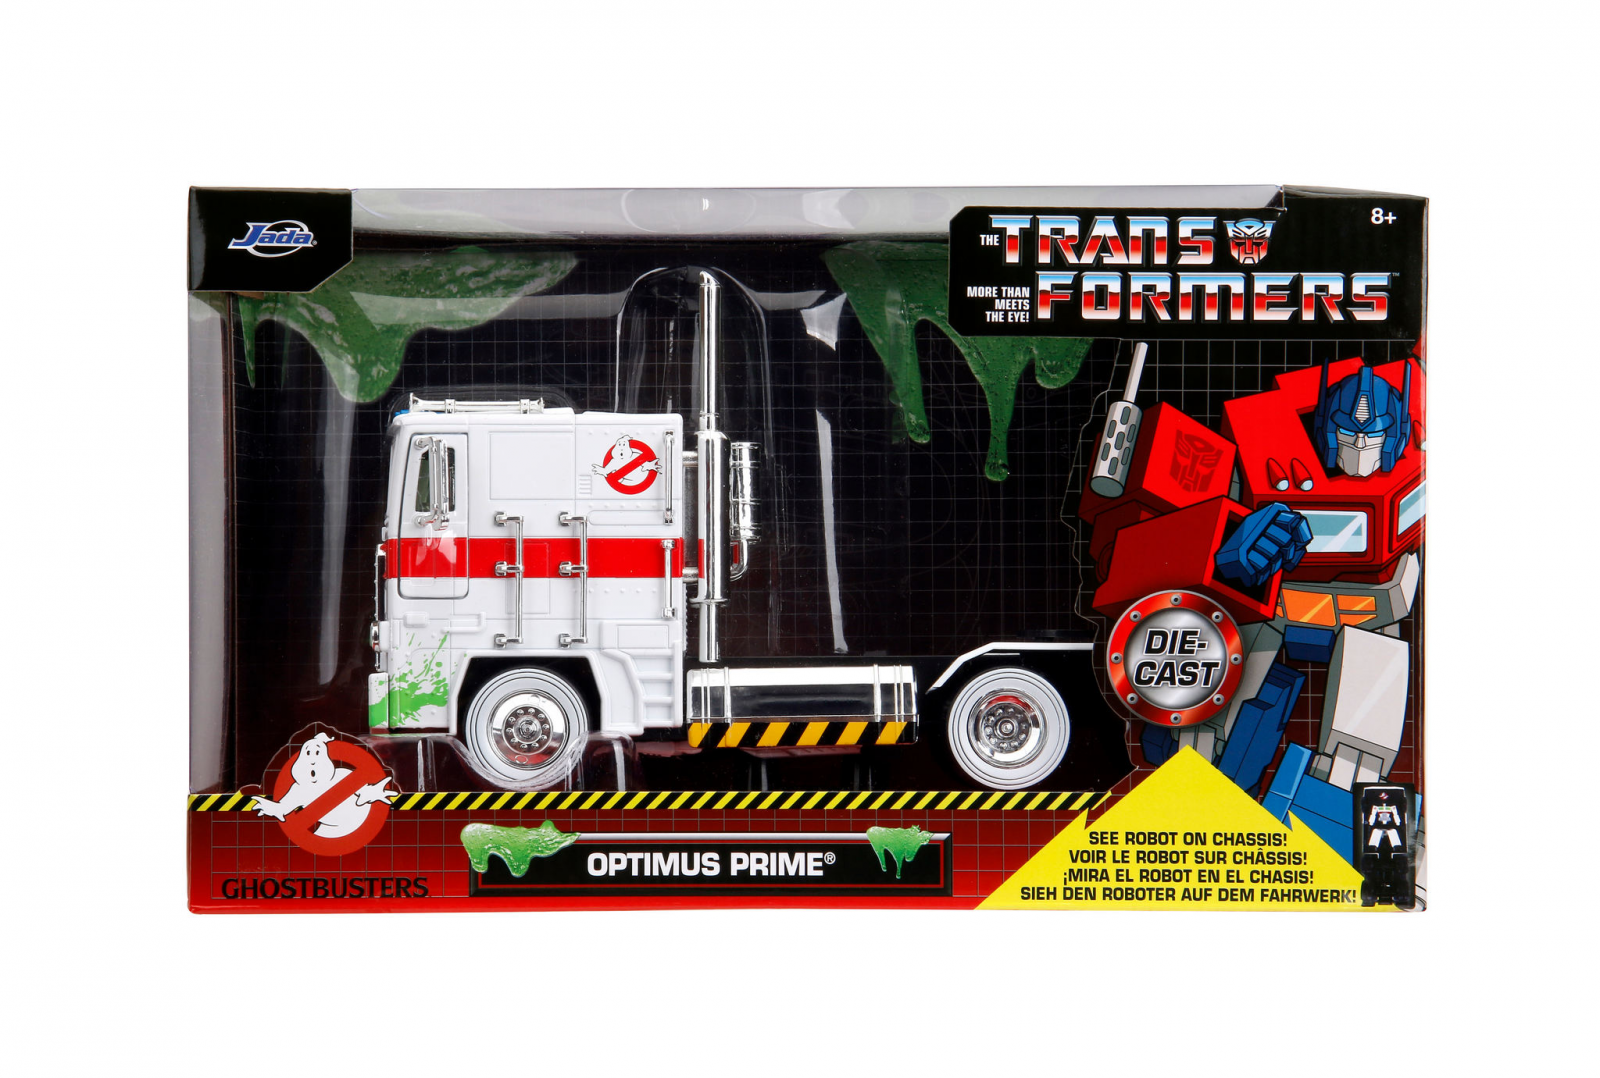 Transformers News: Transformers 40th Anniversary Includes Collaboration with Funko, Ghostbusters and the Masked Singer